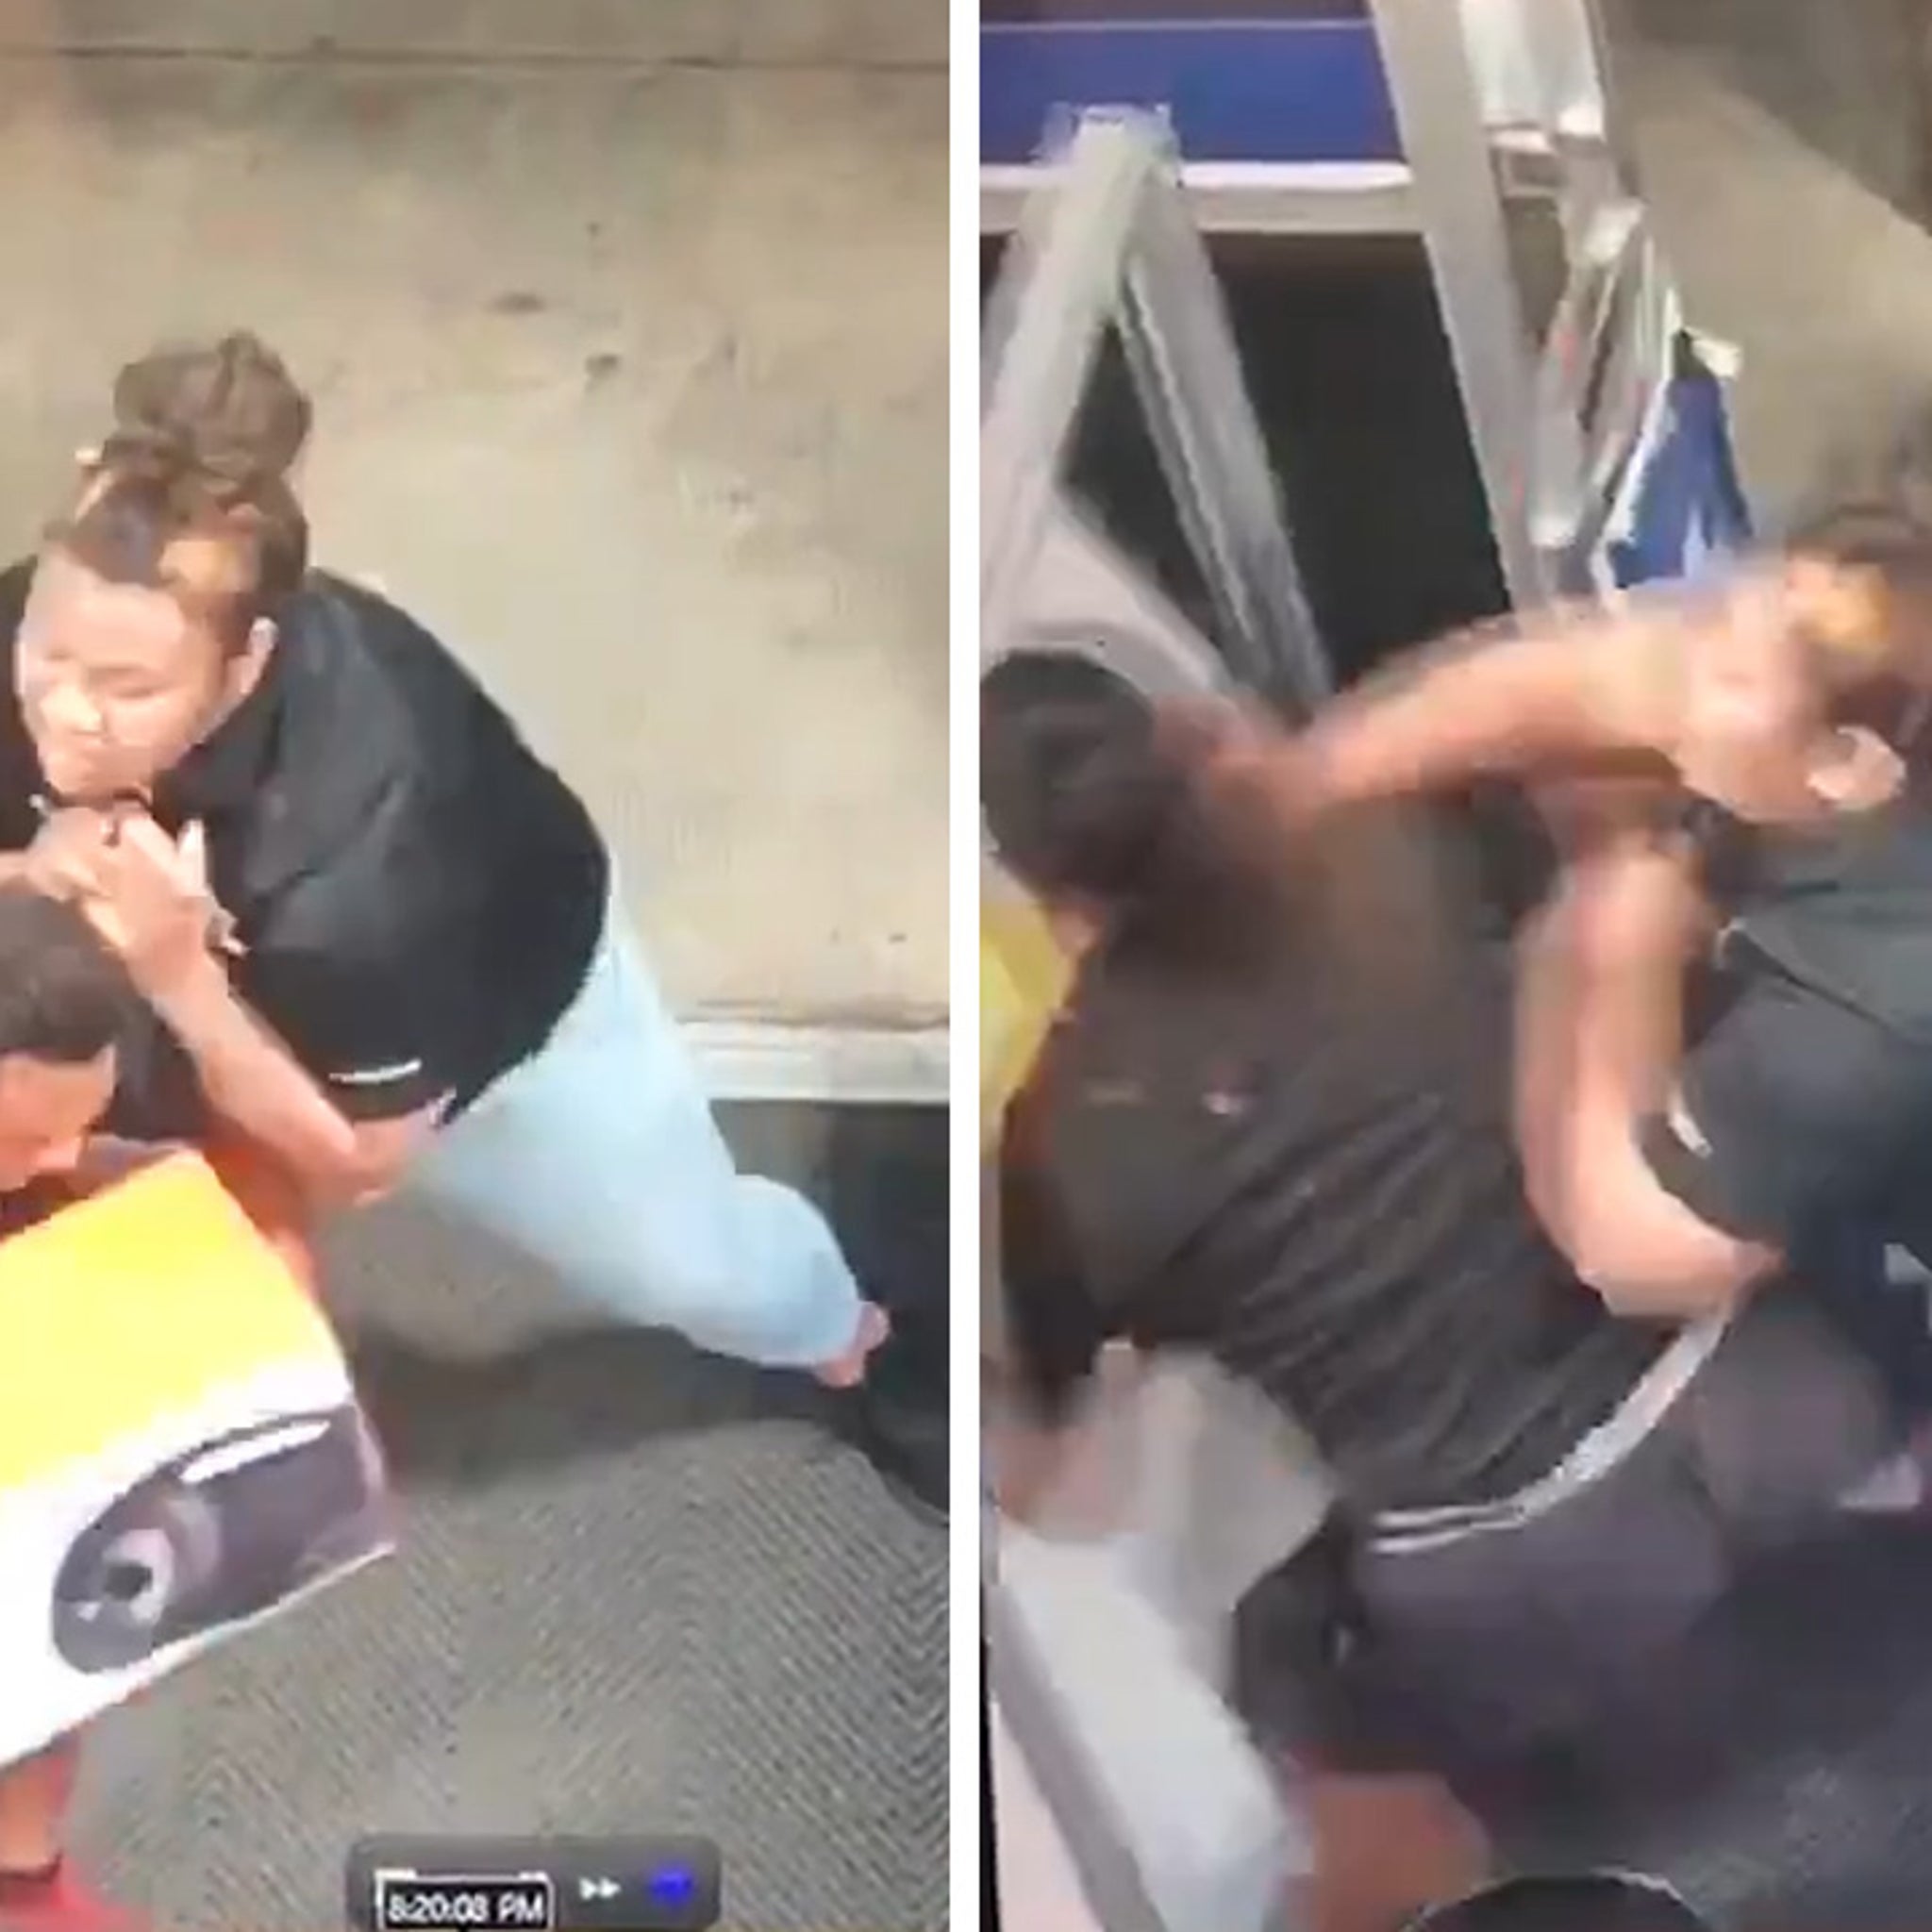 Dana White Hires Viral Best Buy Security Guard Who Punked Alleged Shoplifter